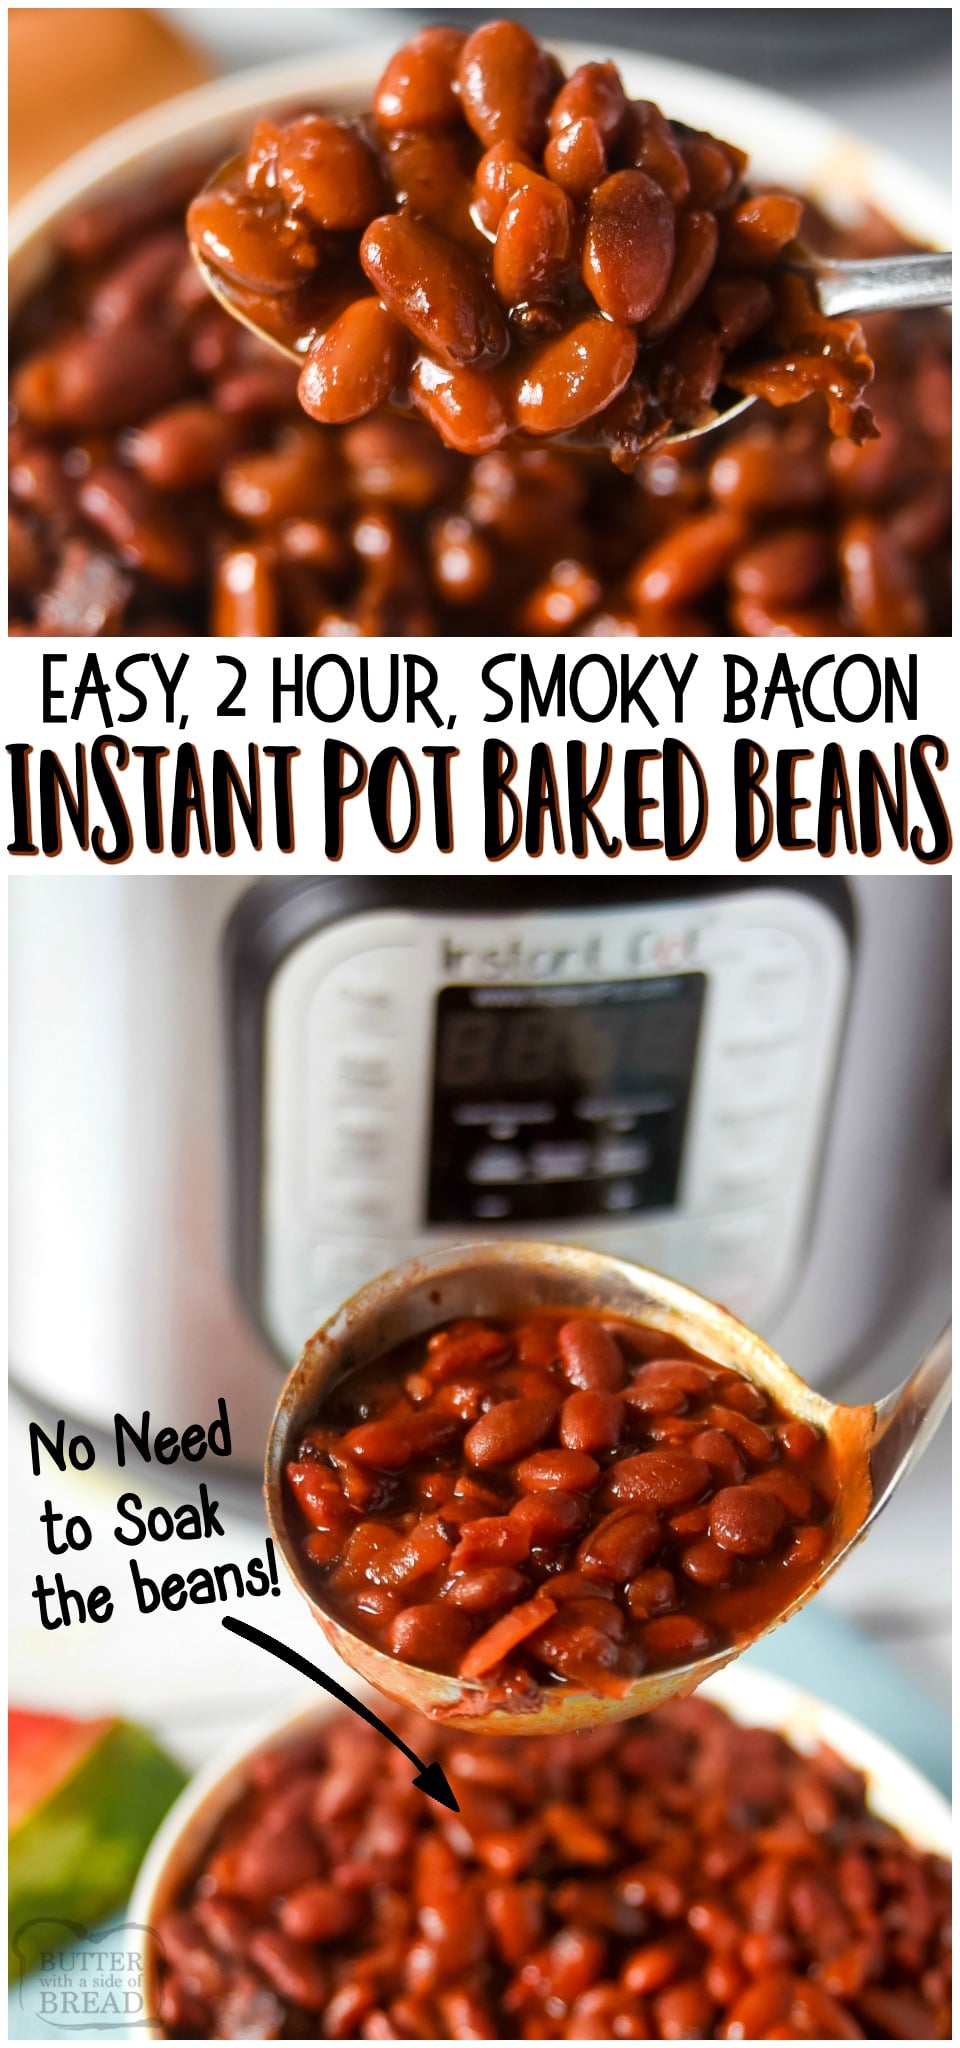 Easy Instant Pot Smoky Baked Beans are made with dry pinto beans (no soaking!), bacon, onion and spices! Hearty, flavorful baked bean recipe that tastes like it's been slow cooking for days, even though it's done in 2 hours!